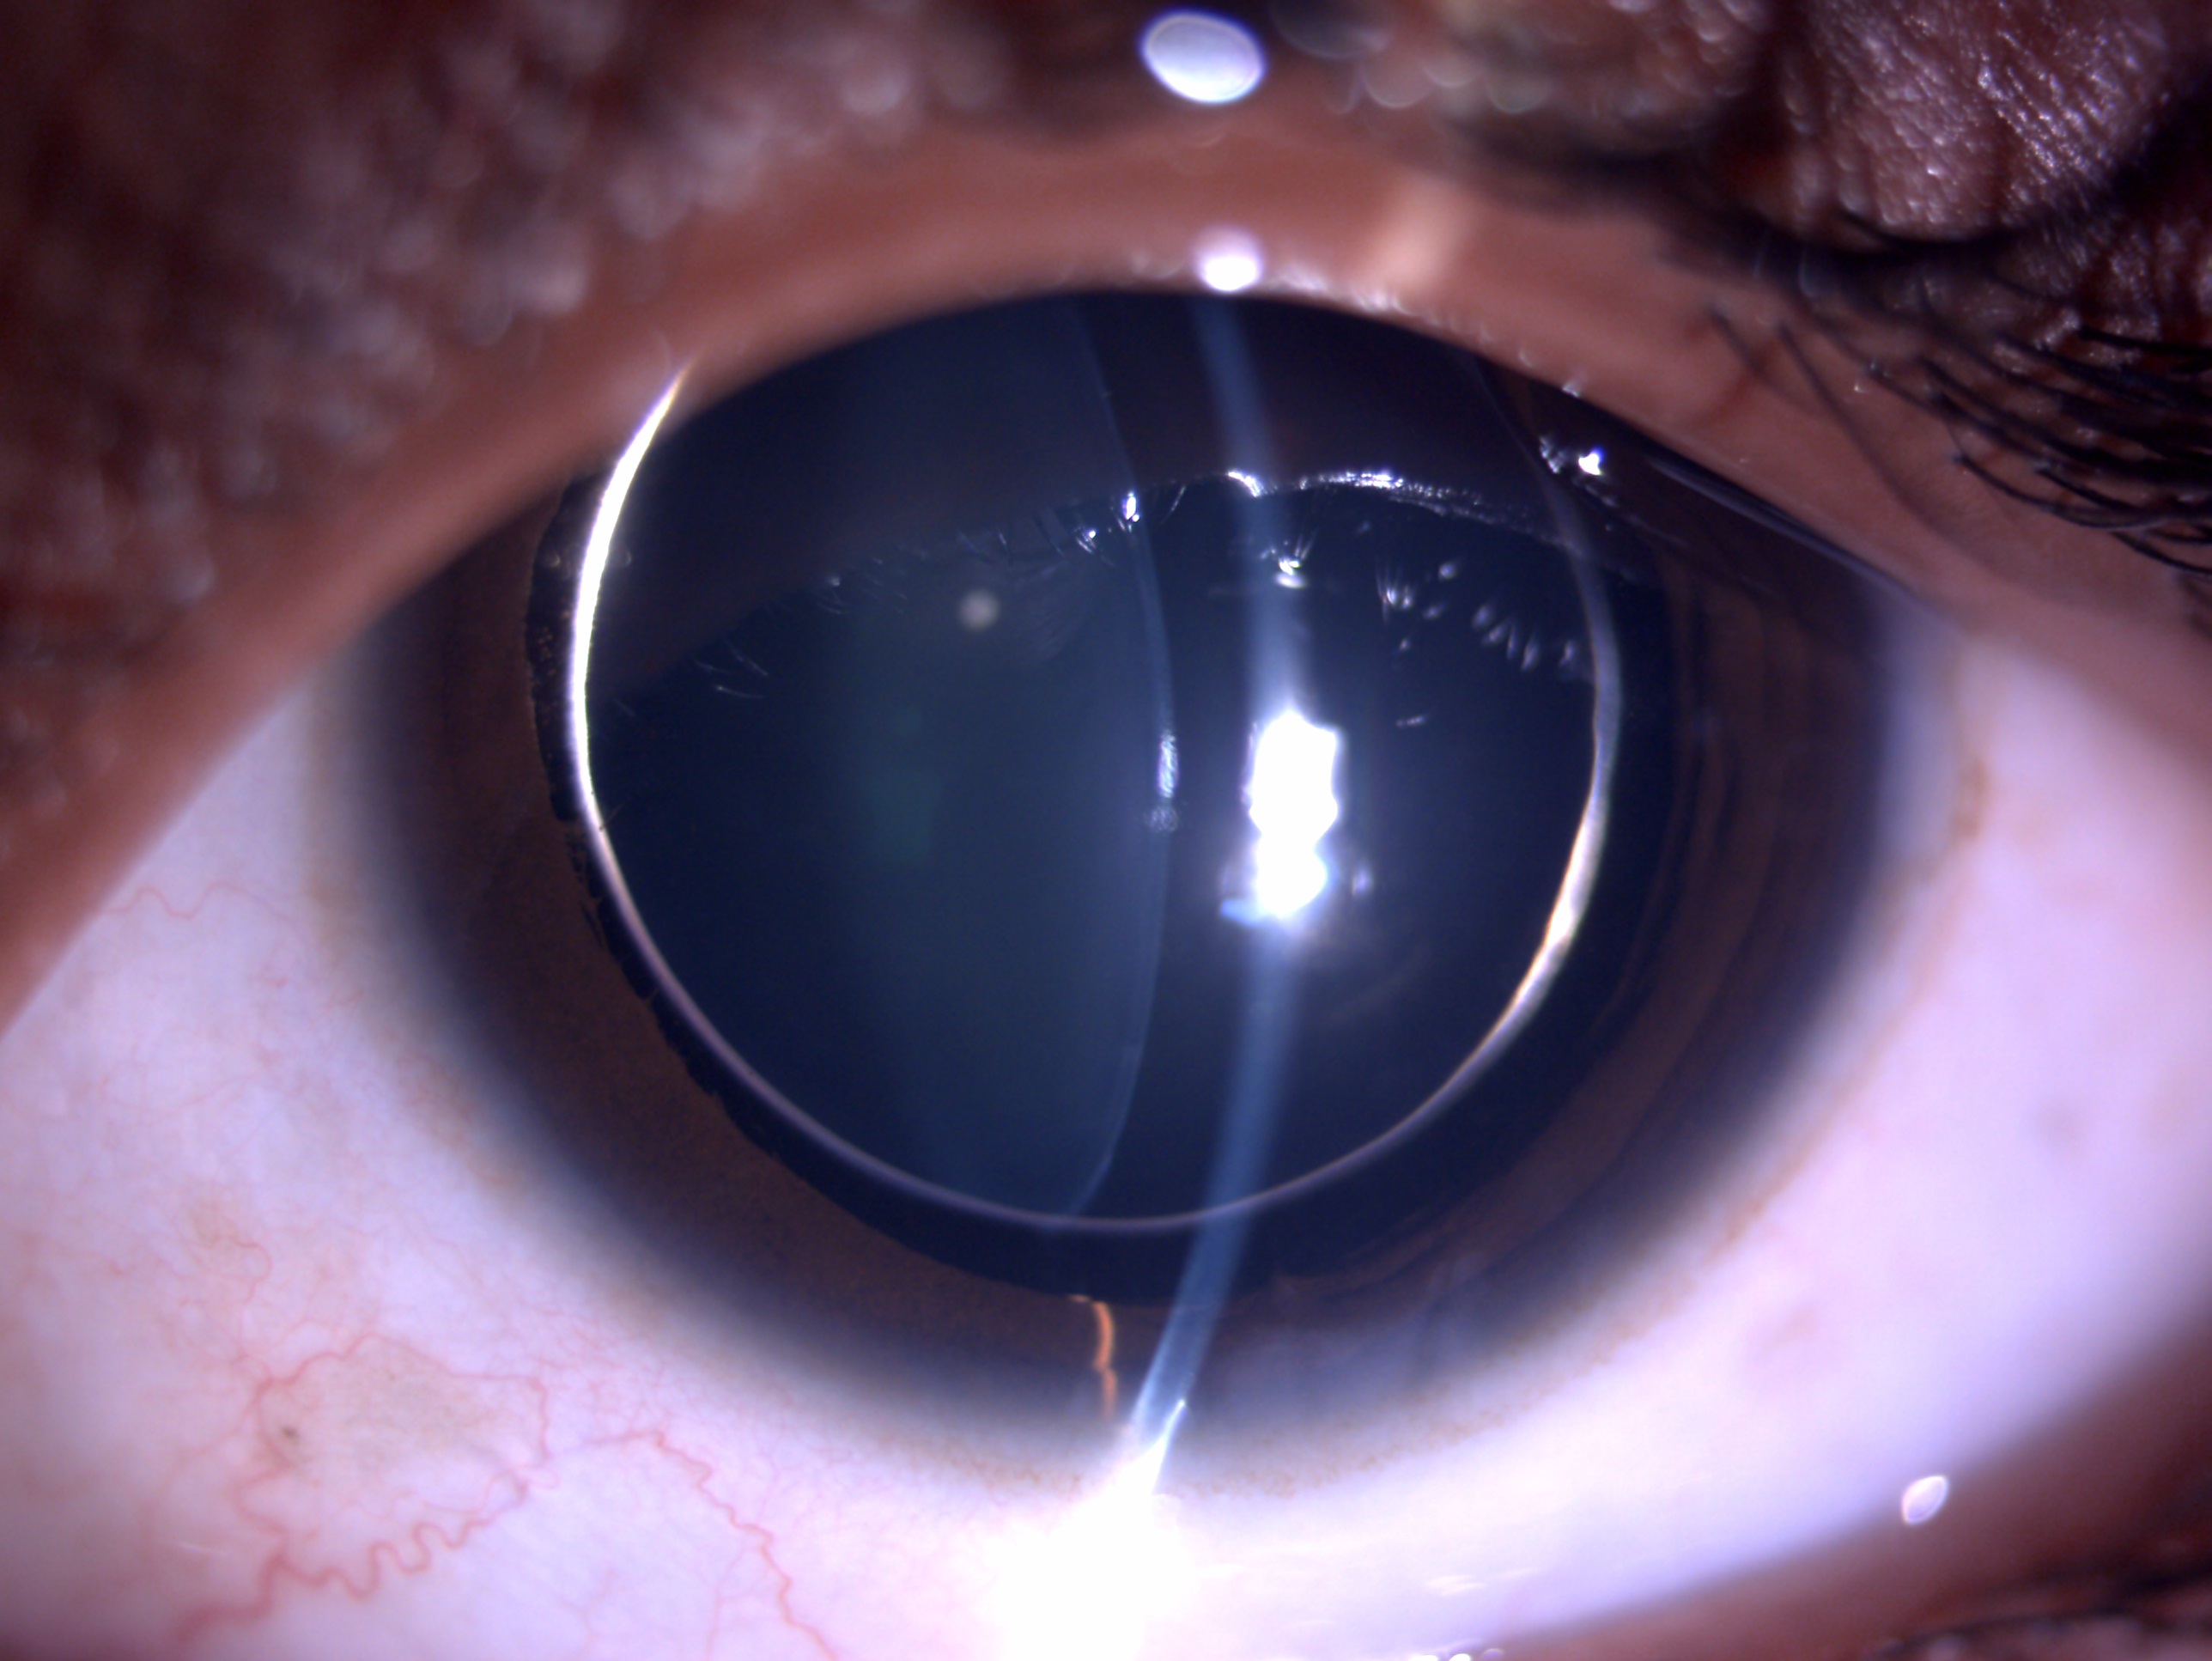 Slit lamp image of the patient depicting small globular, spherical clear lens with 360 deficient zonules and equator of lens visible on full mydriasis in a patient with homocystinuria